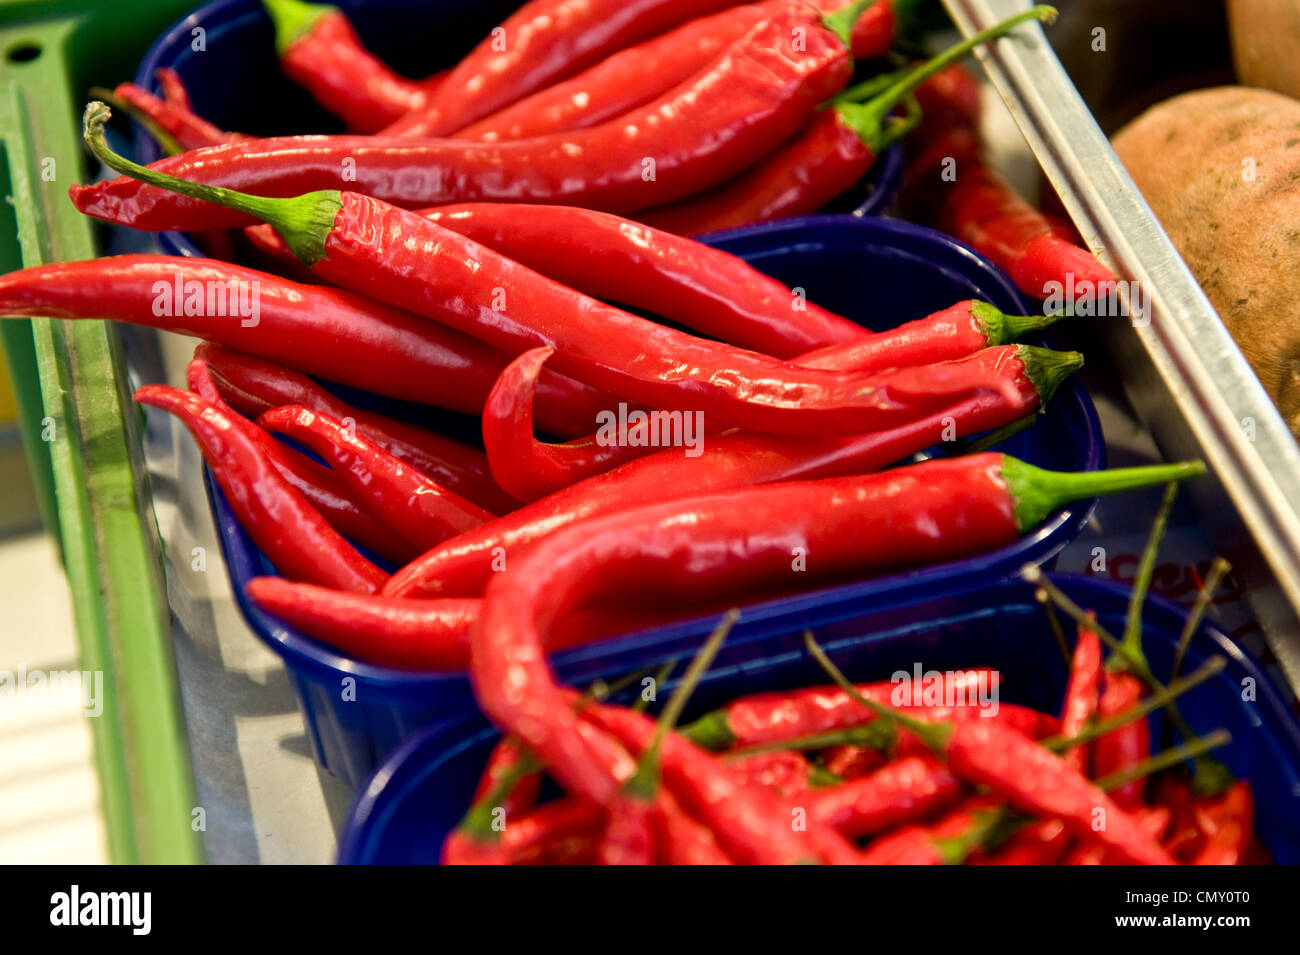 A closeup shot of glazed, shiny cayenne peppers grouped in mini blue baskets on a green tray in a food market. Stock Photo